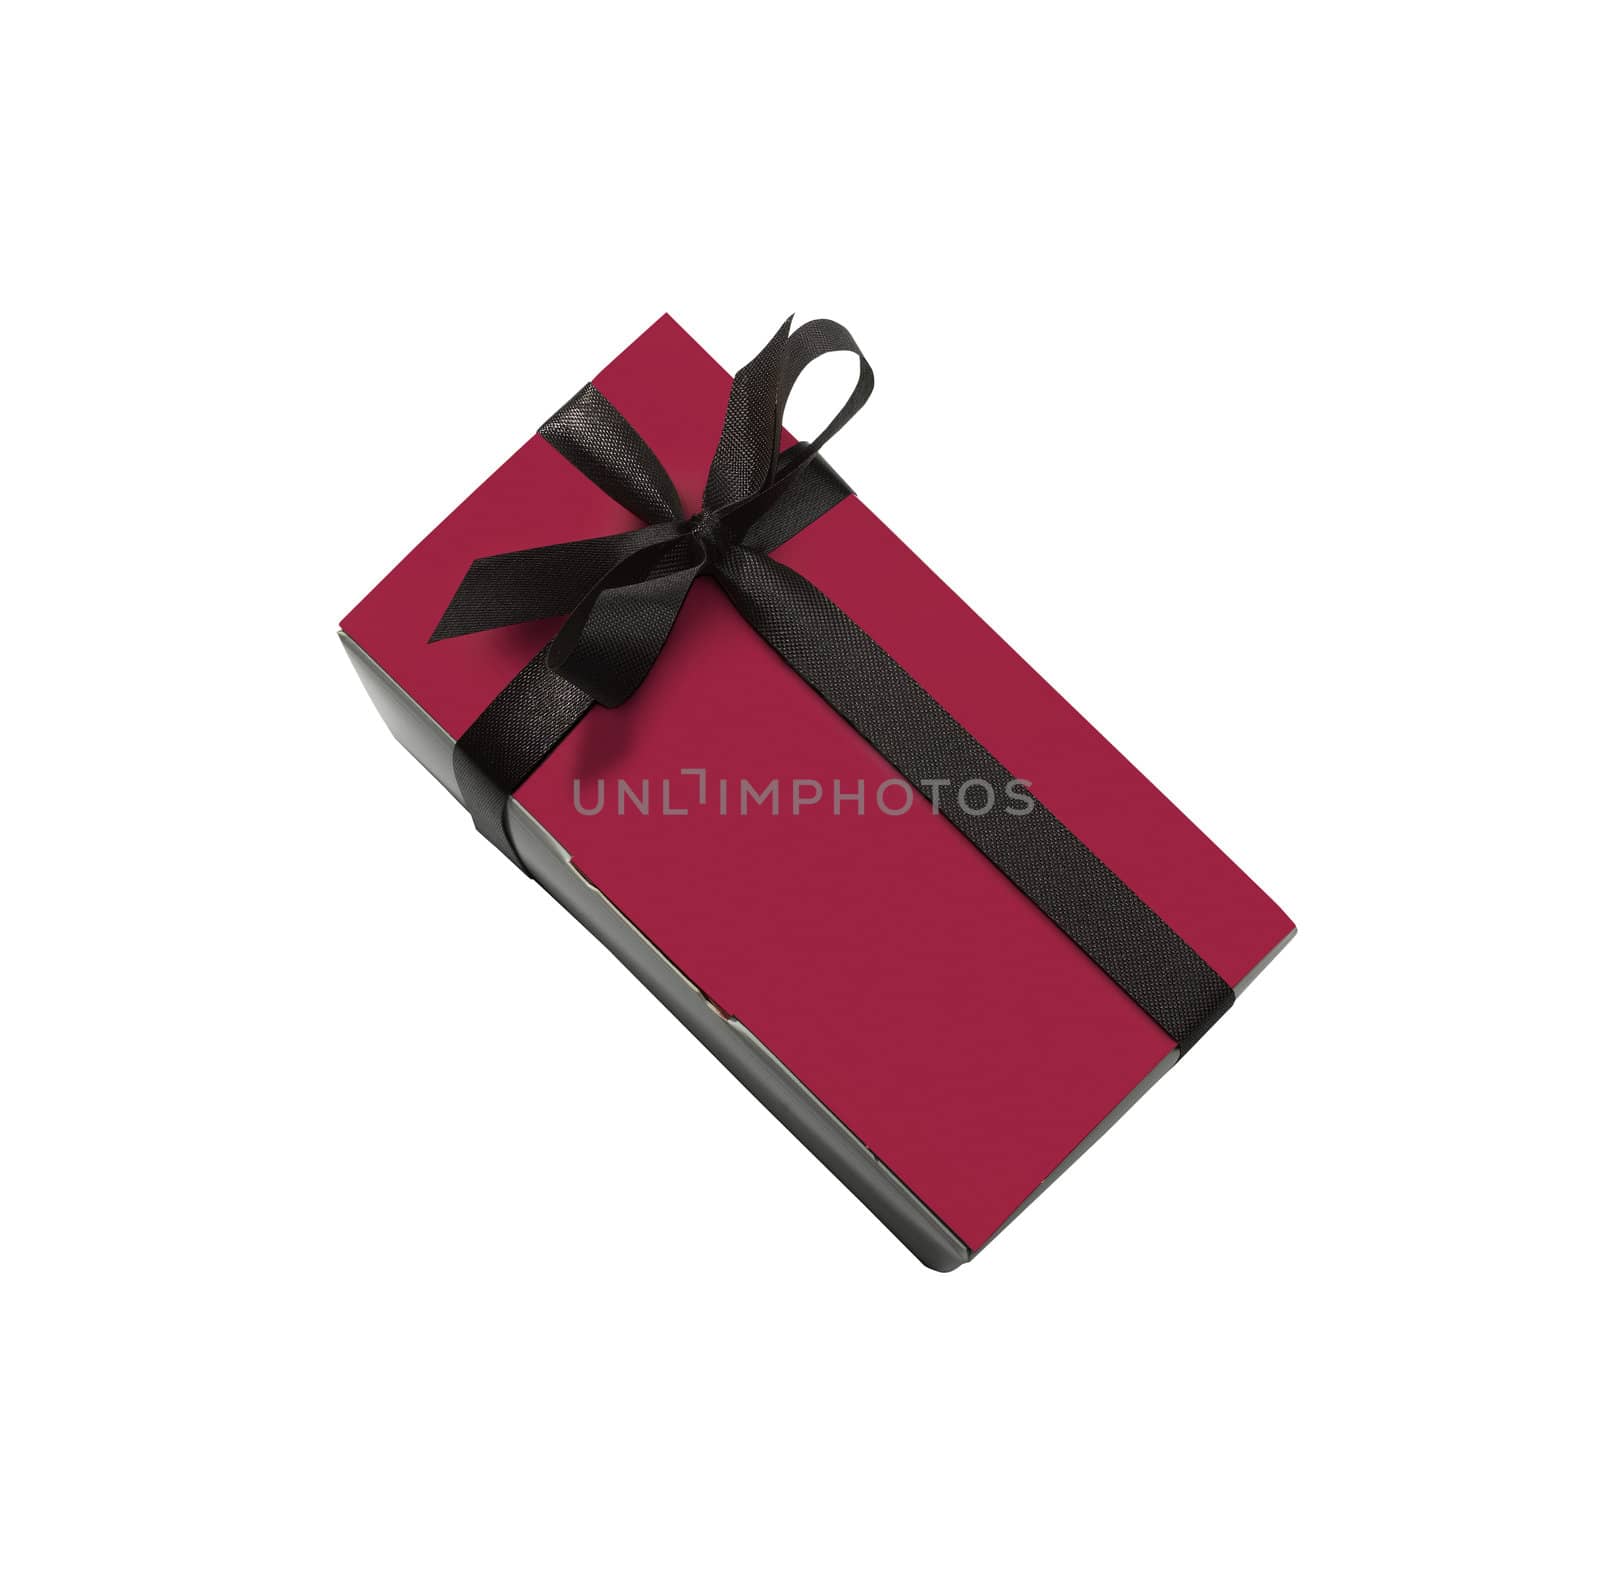 Luxurious gift box (clipping path) by pbombaert